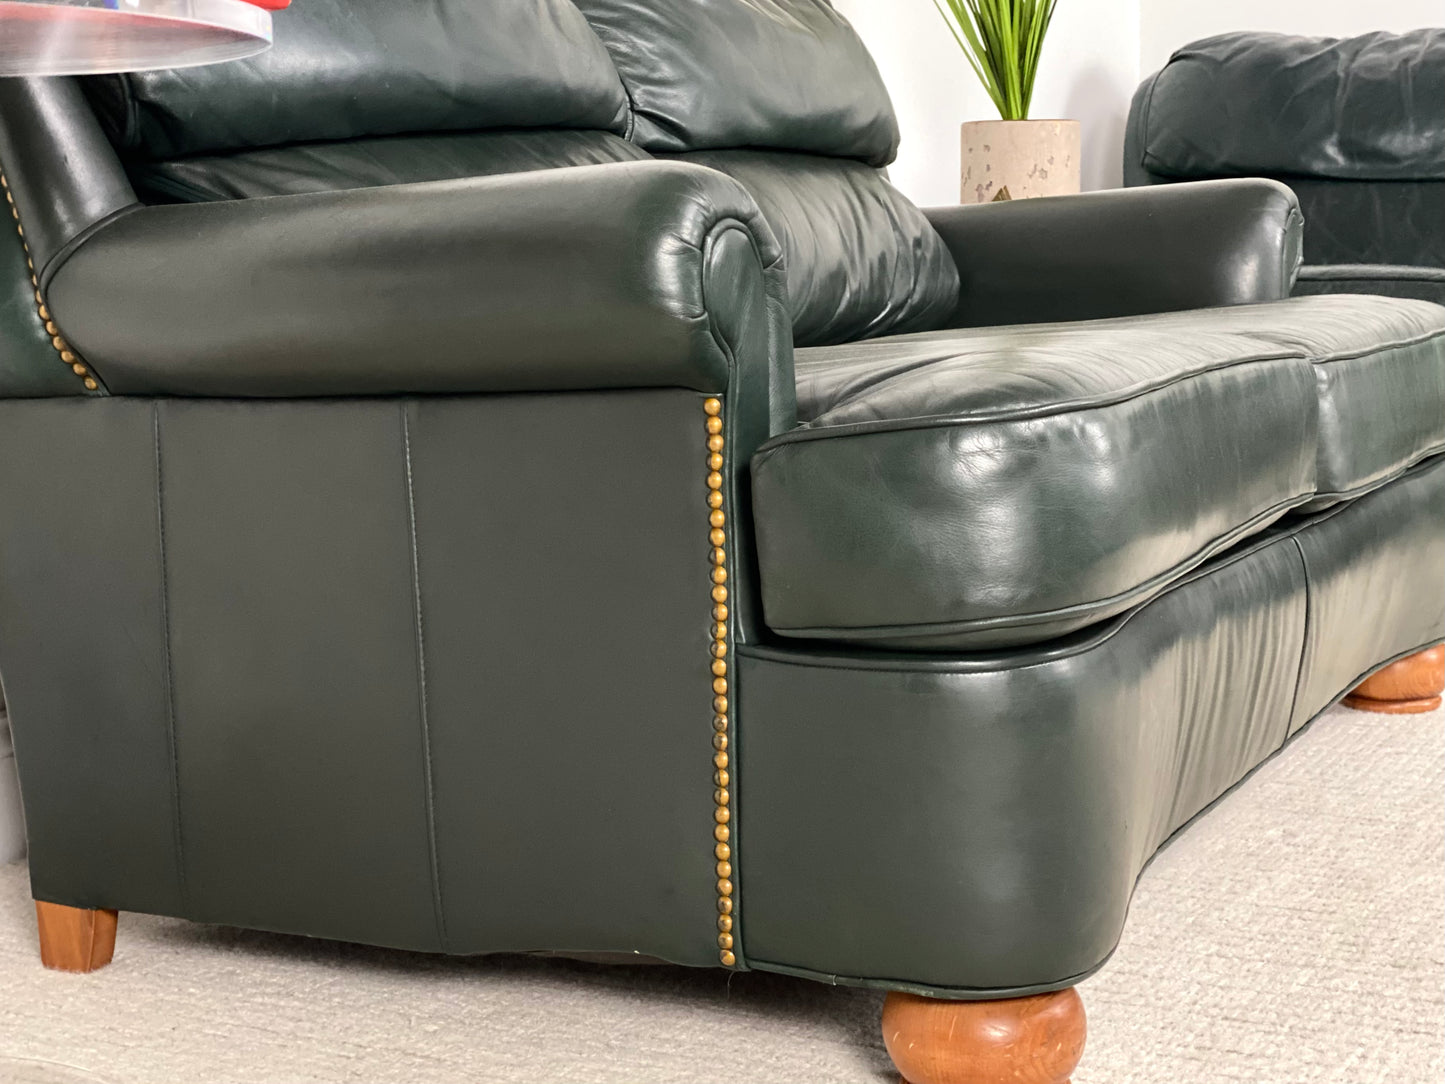 Modern Green Leather Loveseat Couch